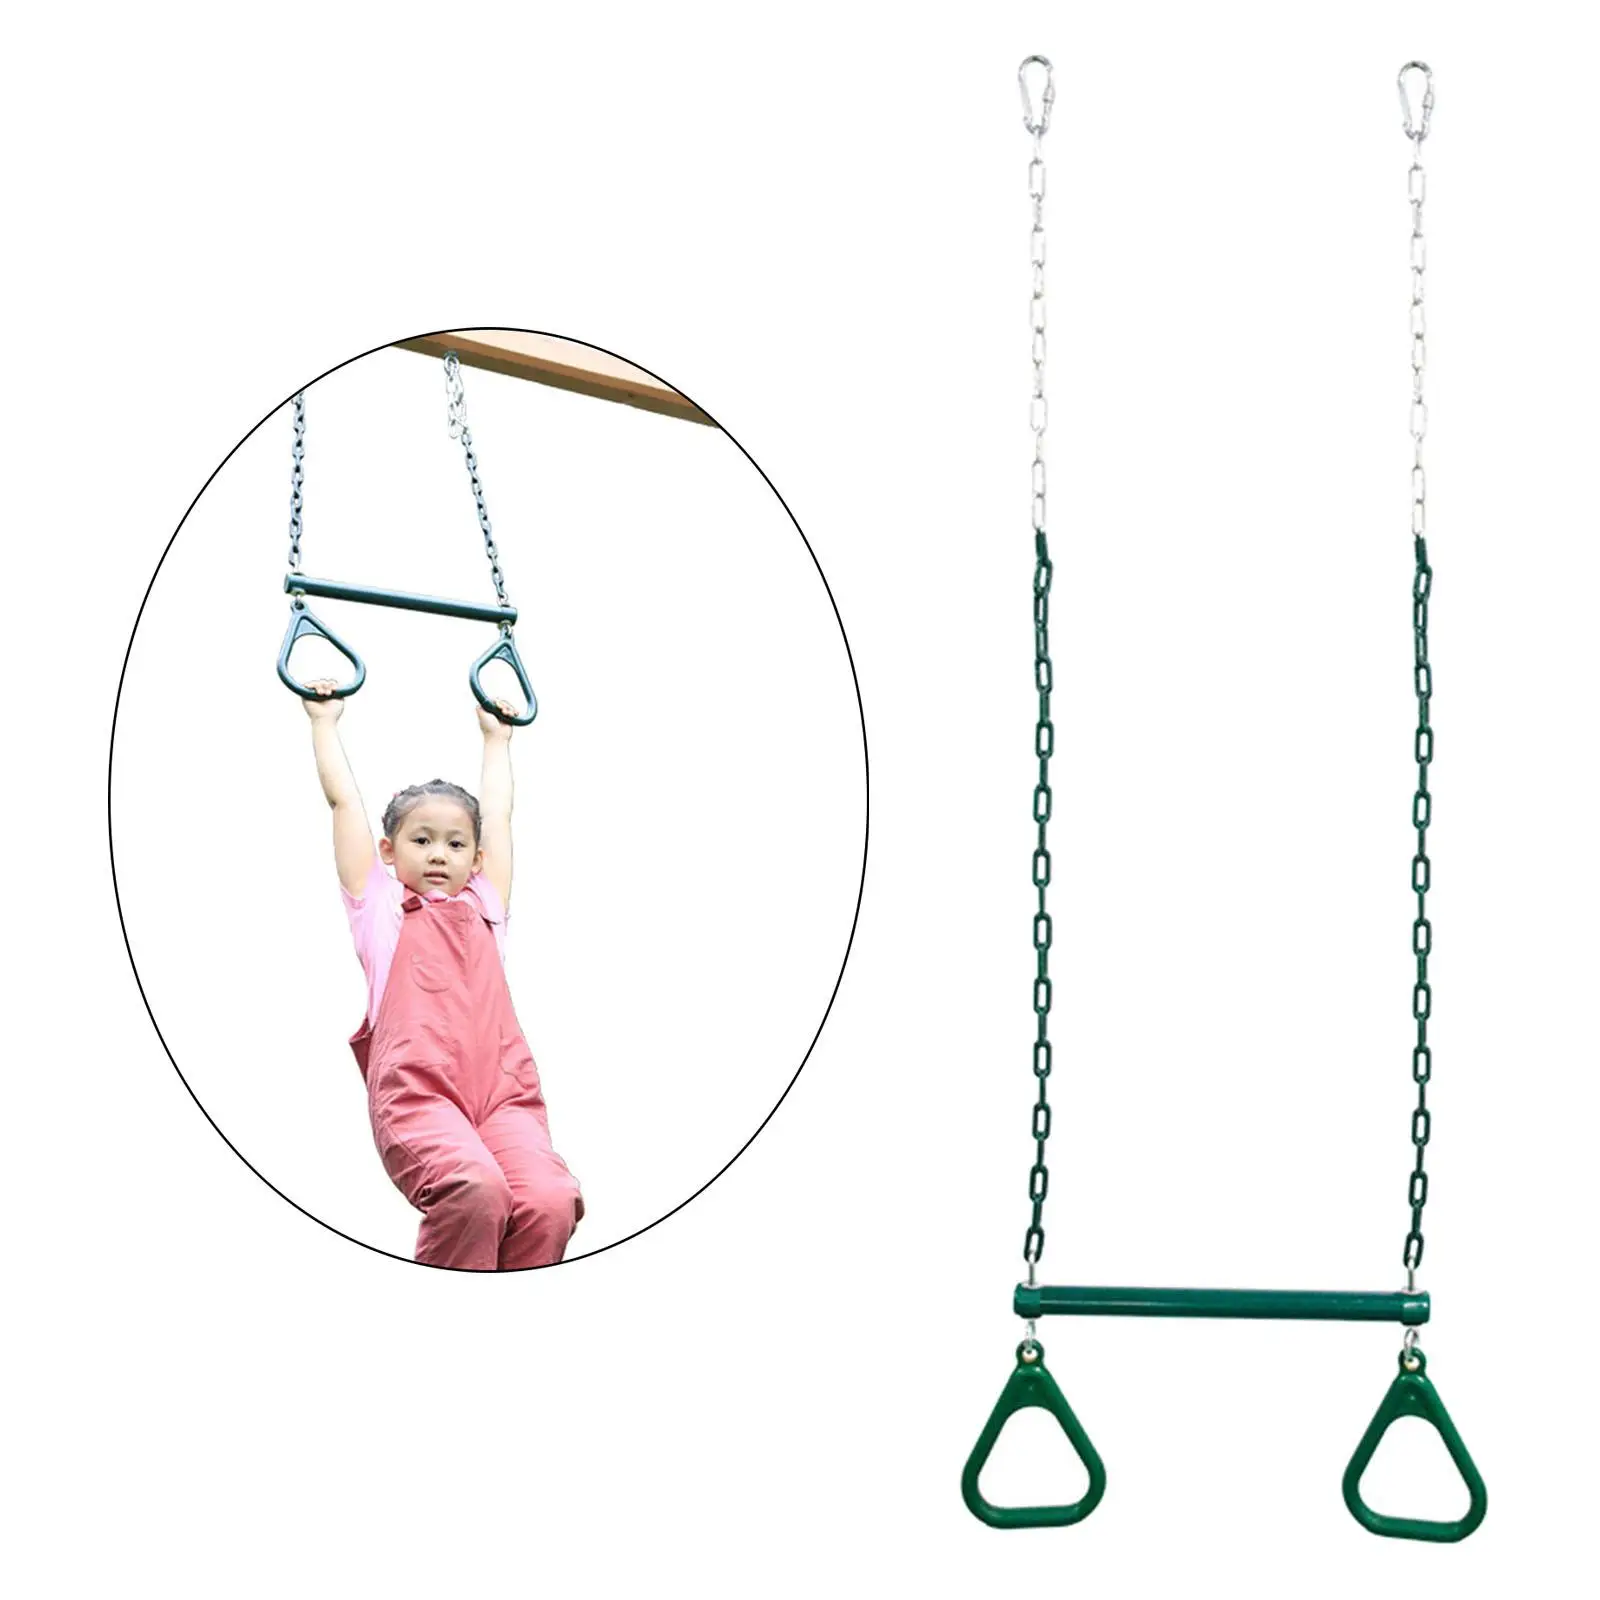 Trapeze Swing Bar with Rings Locking Carabiners for Garden Outdoor Equipment